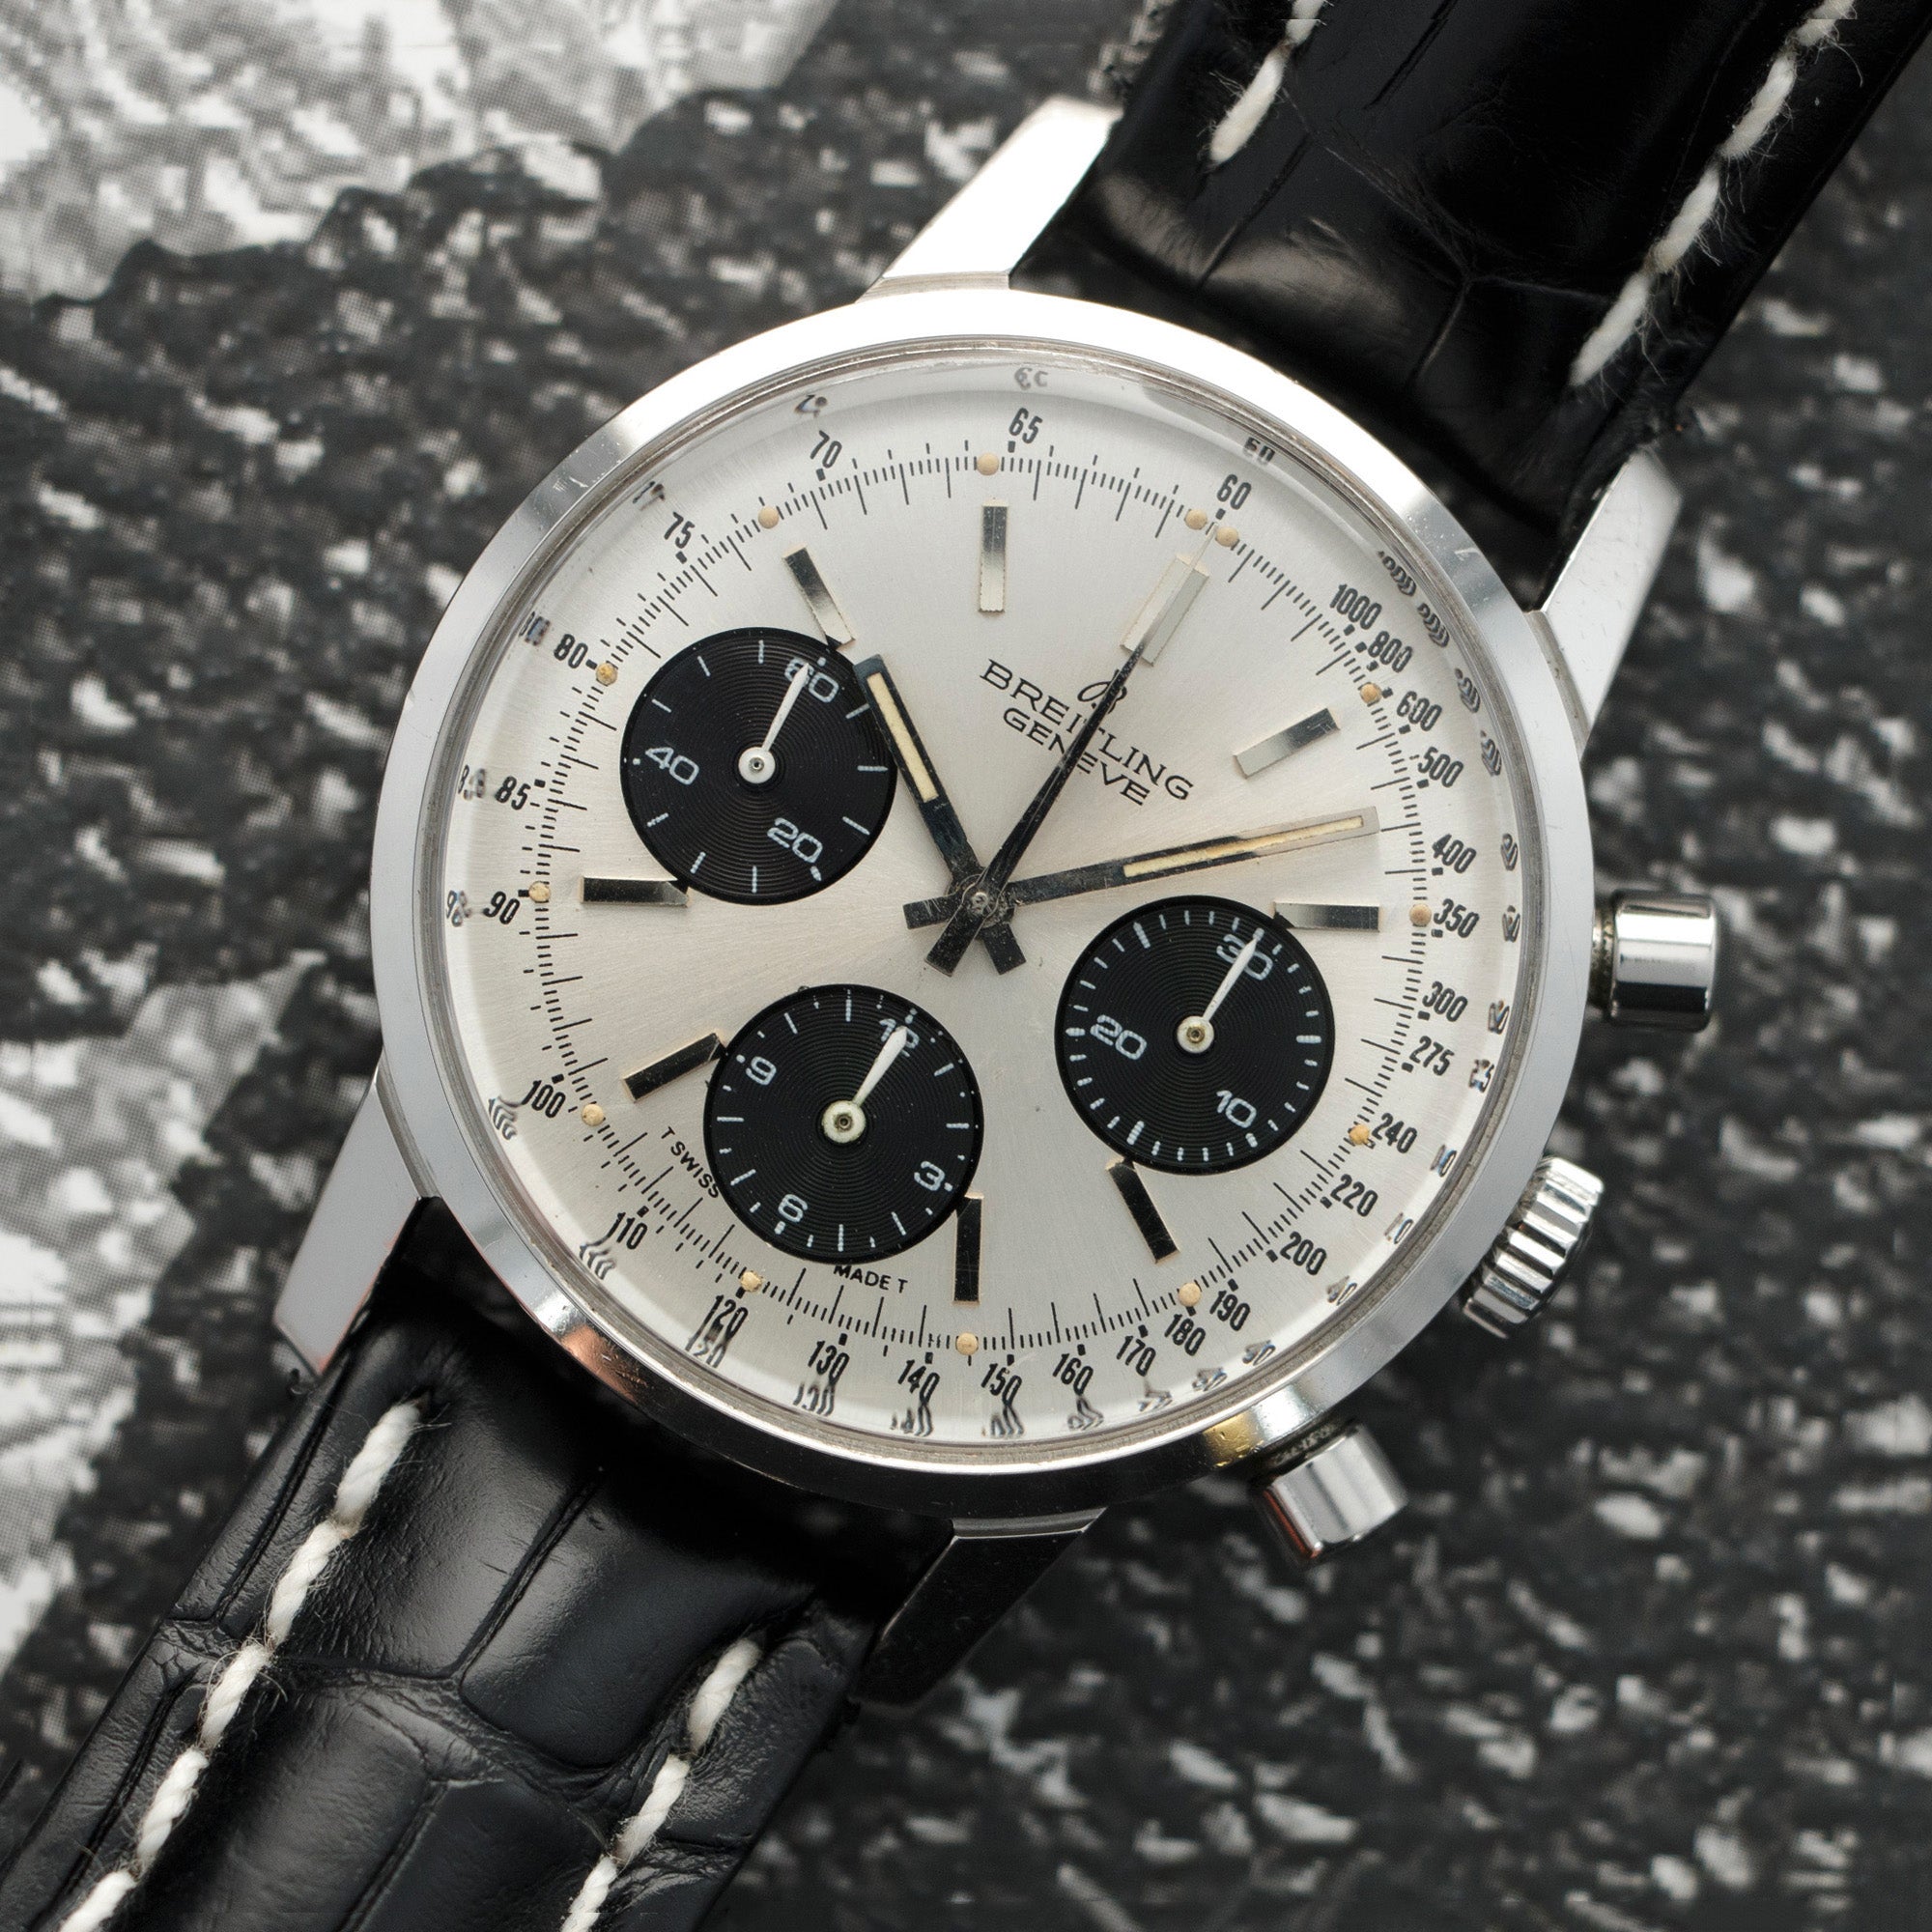 Breitling - Breitling Steel Chronograph Ref. 815, also Known as the Long Playing Chronograph - The Keystone Watches